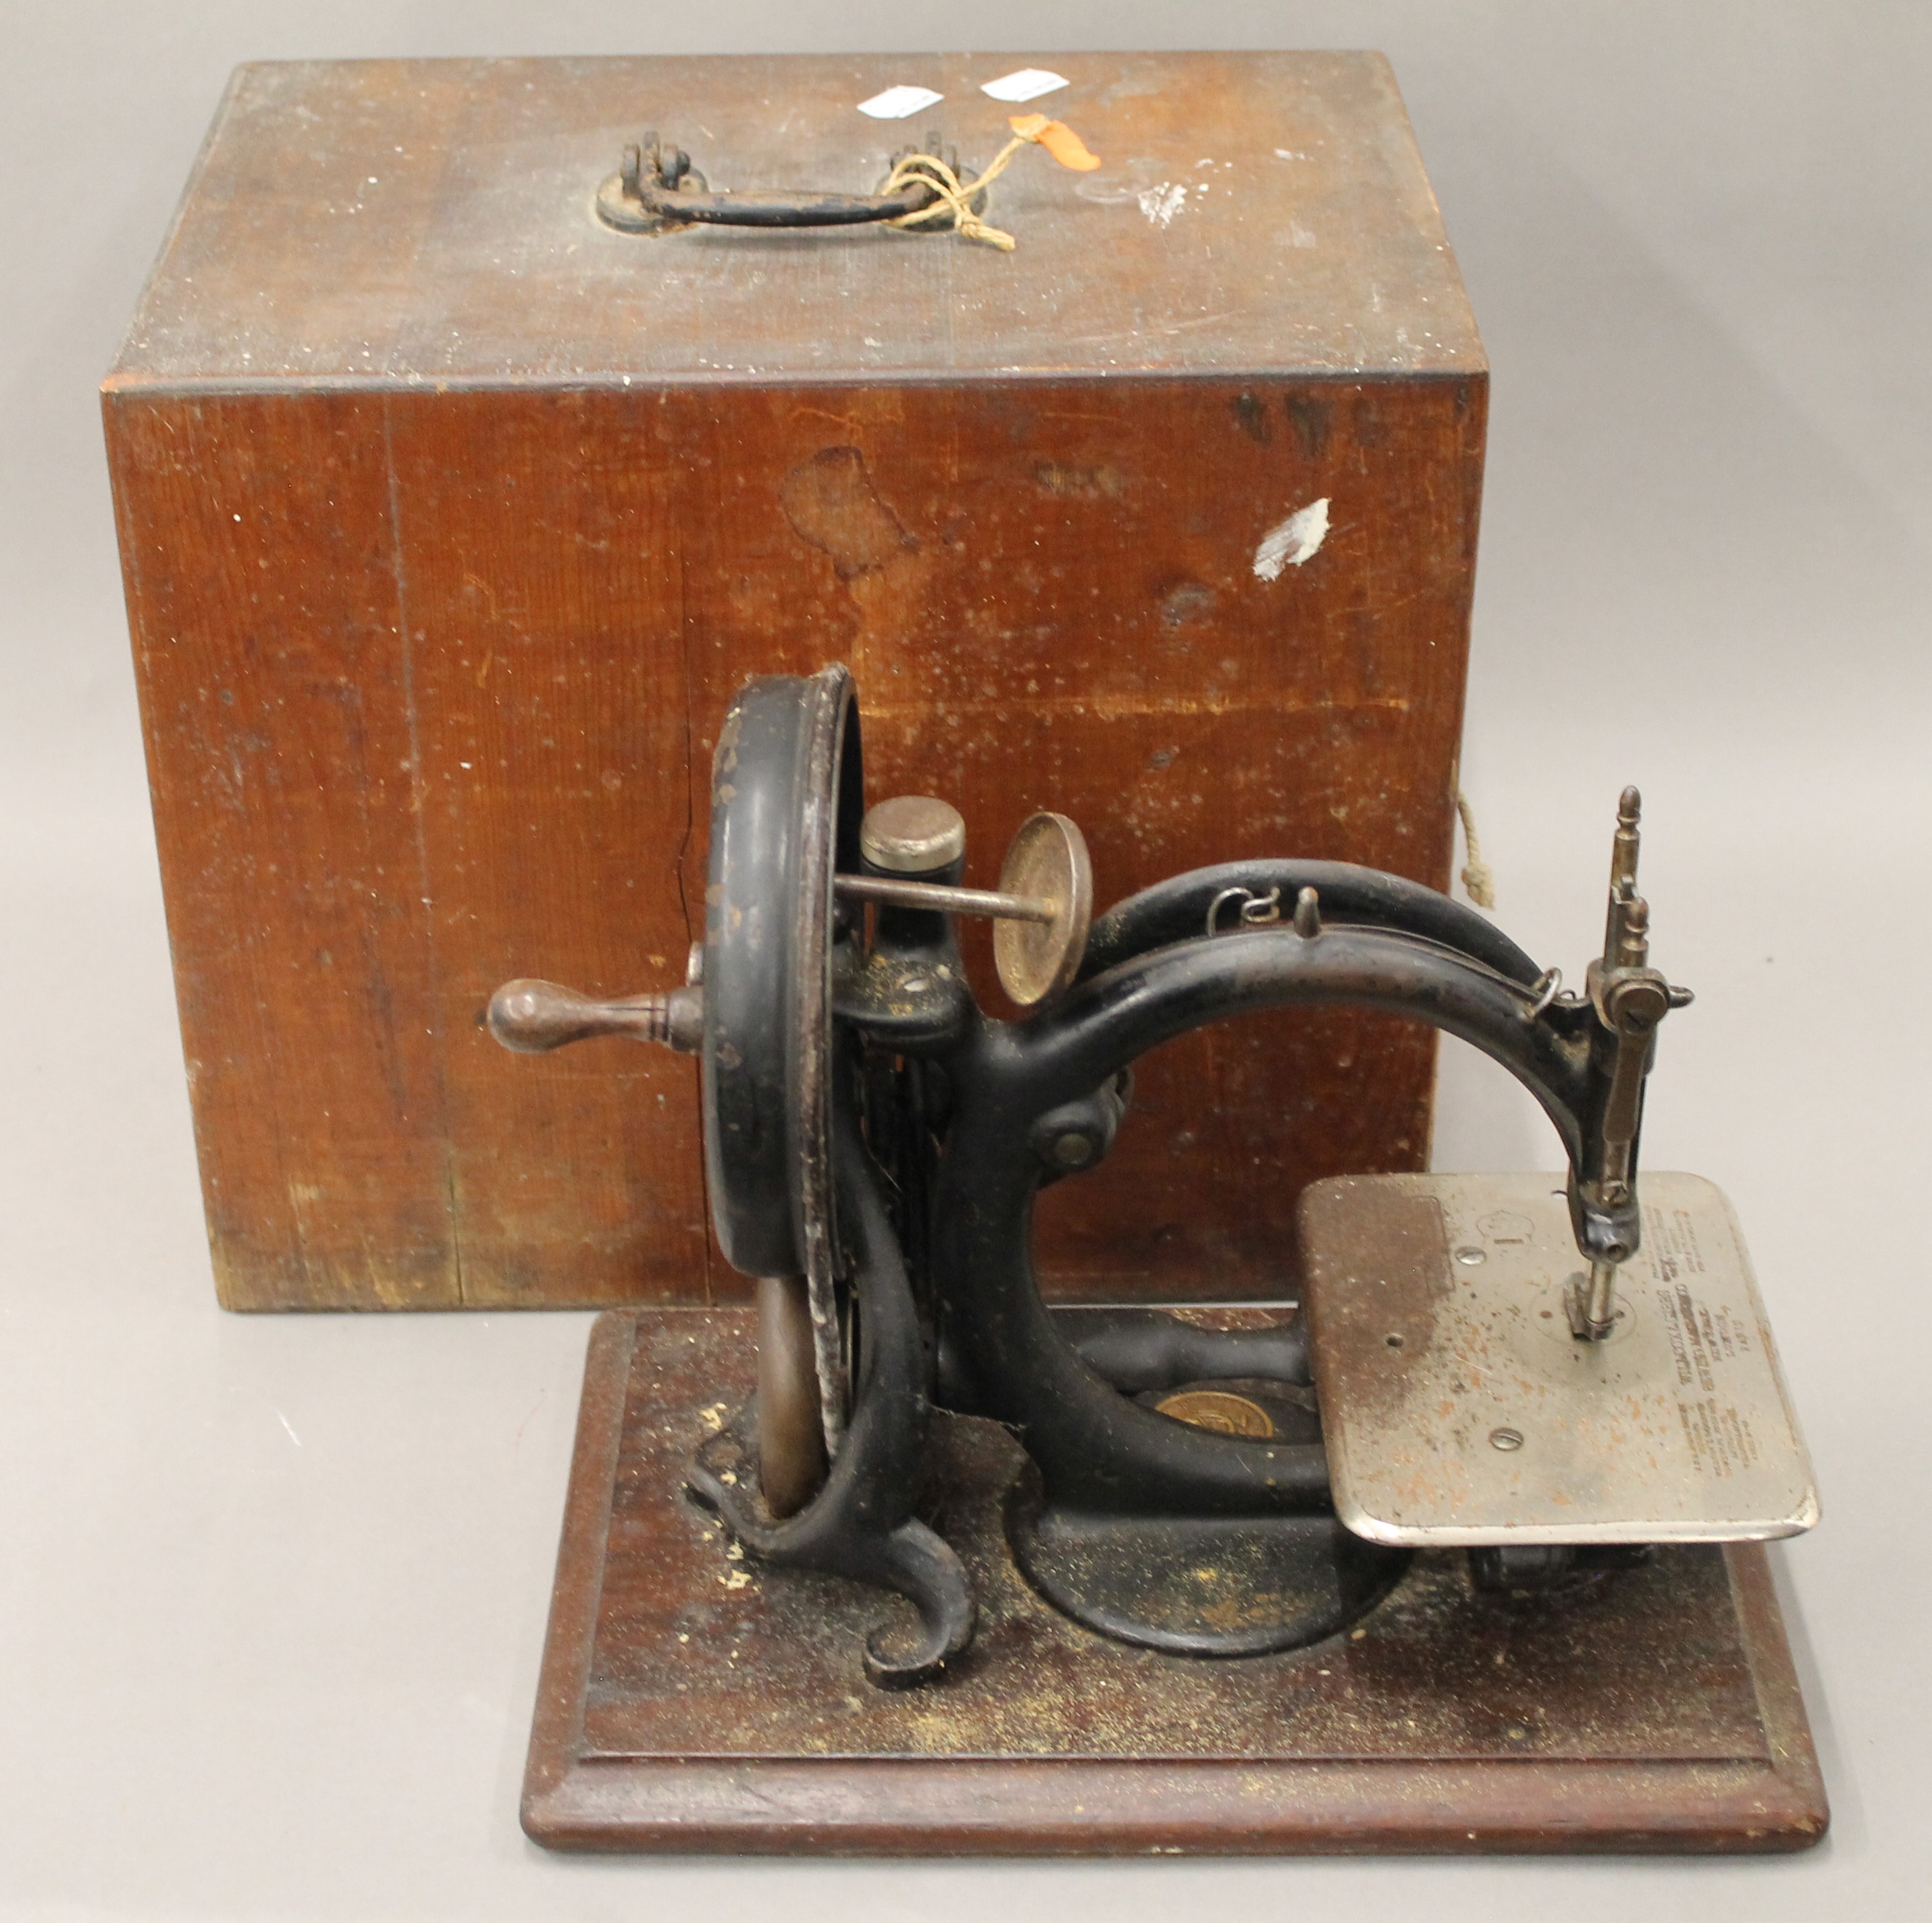 A Wilcox and Gibbs cased sewing machine.